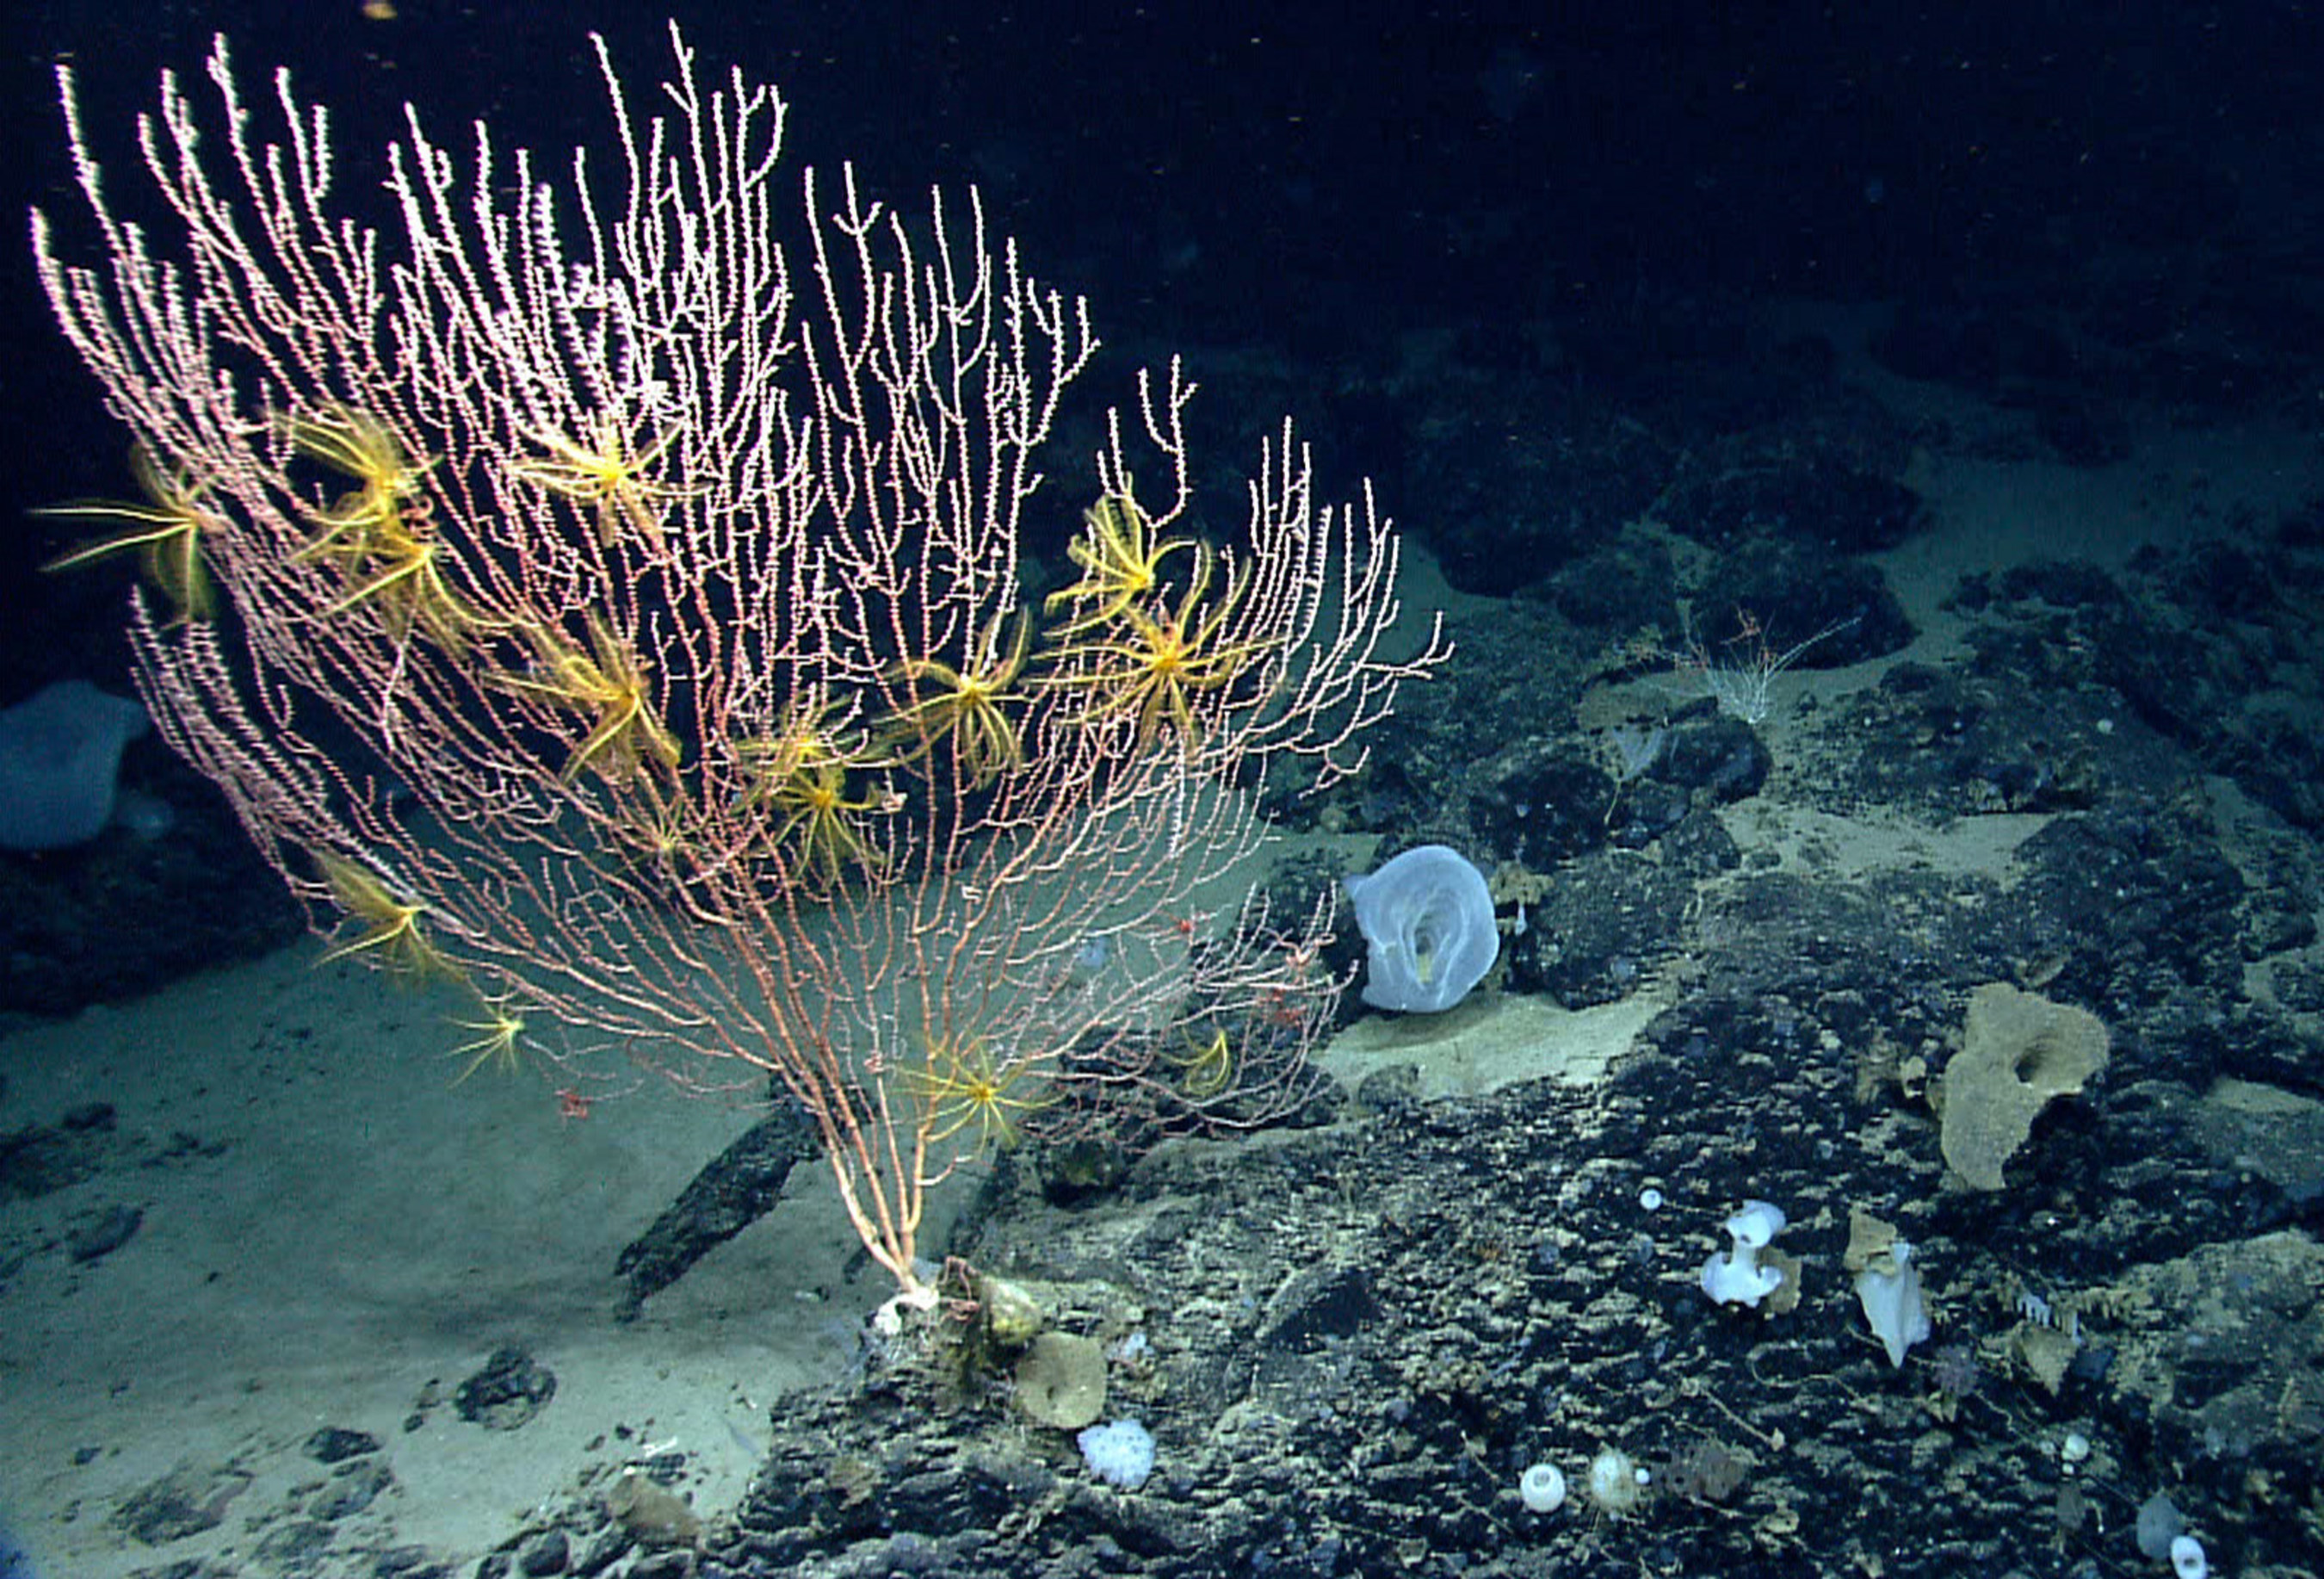 On Mytilus Seamount, a bamboo coral is attached to the black basalt rock formed by a now-extinct undersea volcano. The yellow animals on the coral are crinoids, or sea lilies, in the same major group of animals as sea stars. The summit of Mytilus Seamount is 8,800 ft below the surface of the ocean. Photo: NOAA Okeanos Explorer Program, 2013 Northeast U.S. Canyons Expedition Science Team